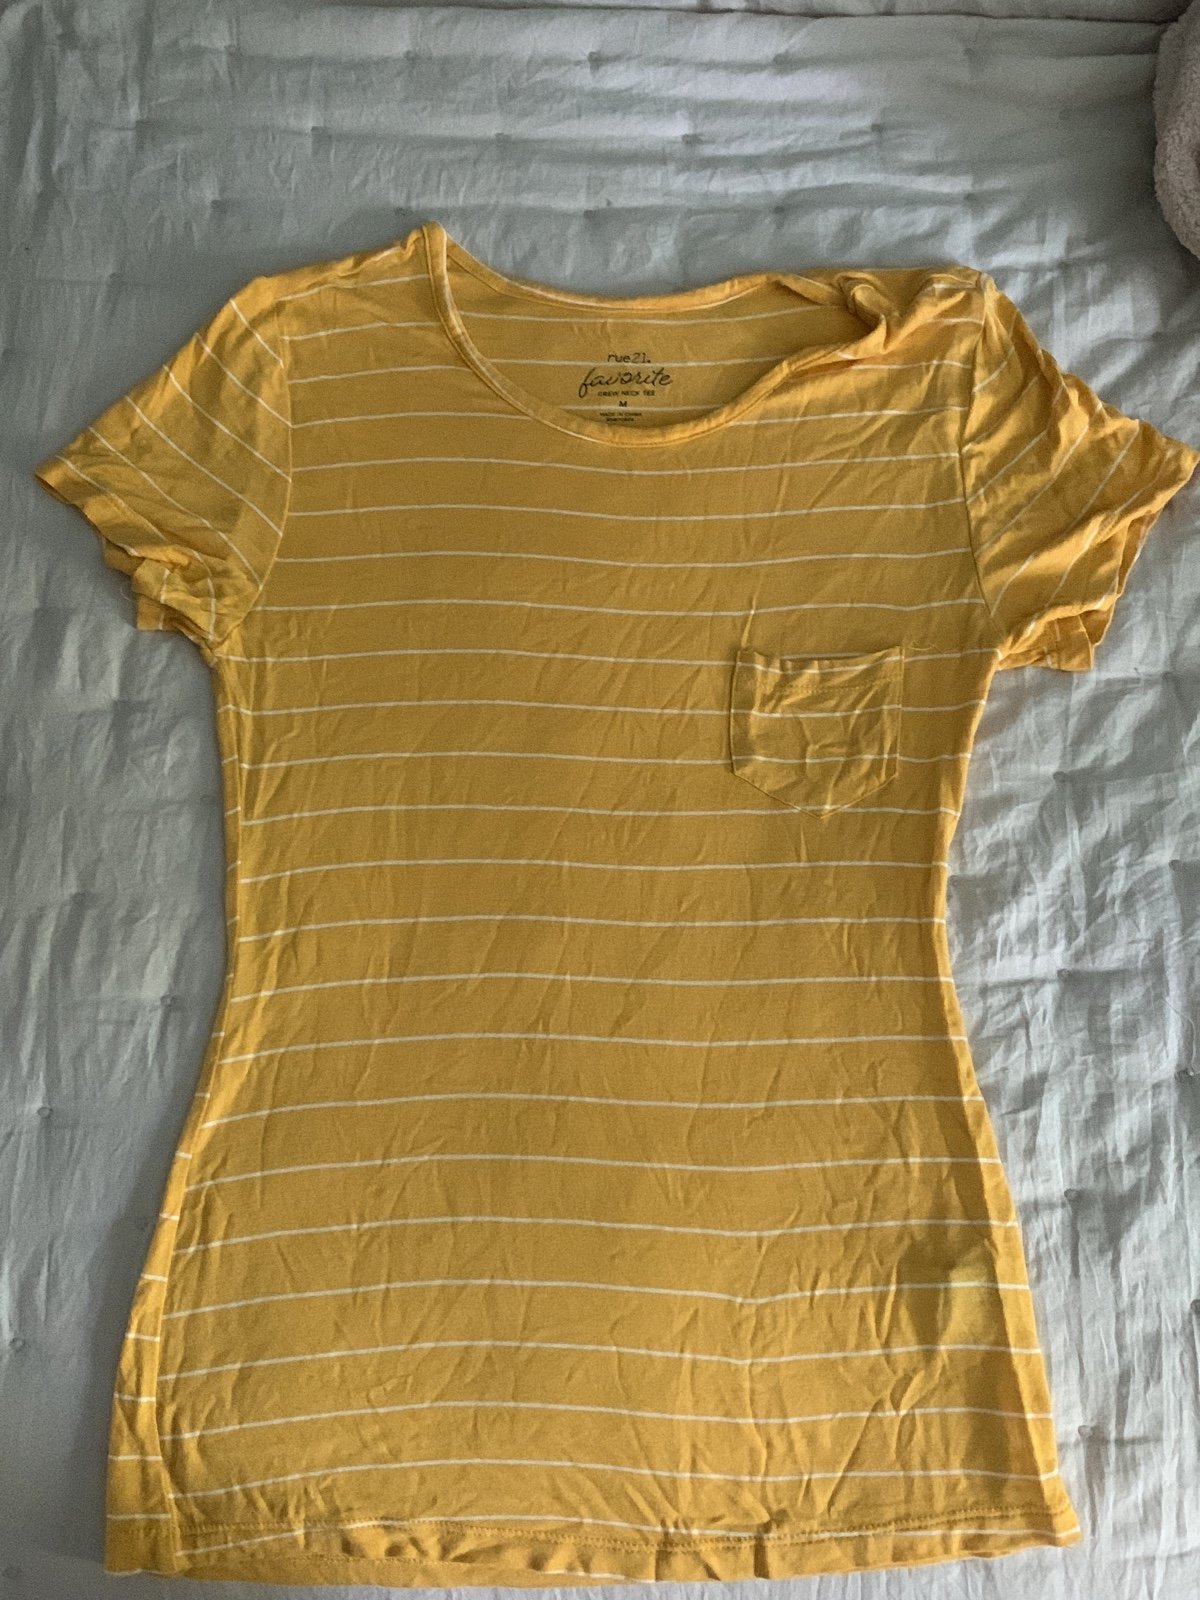 Authentic Yellow striped t-shirt very comfortable and s